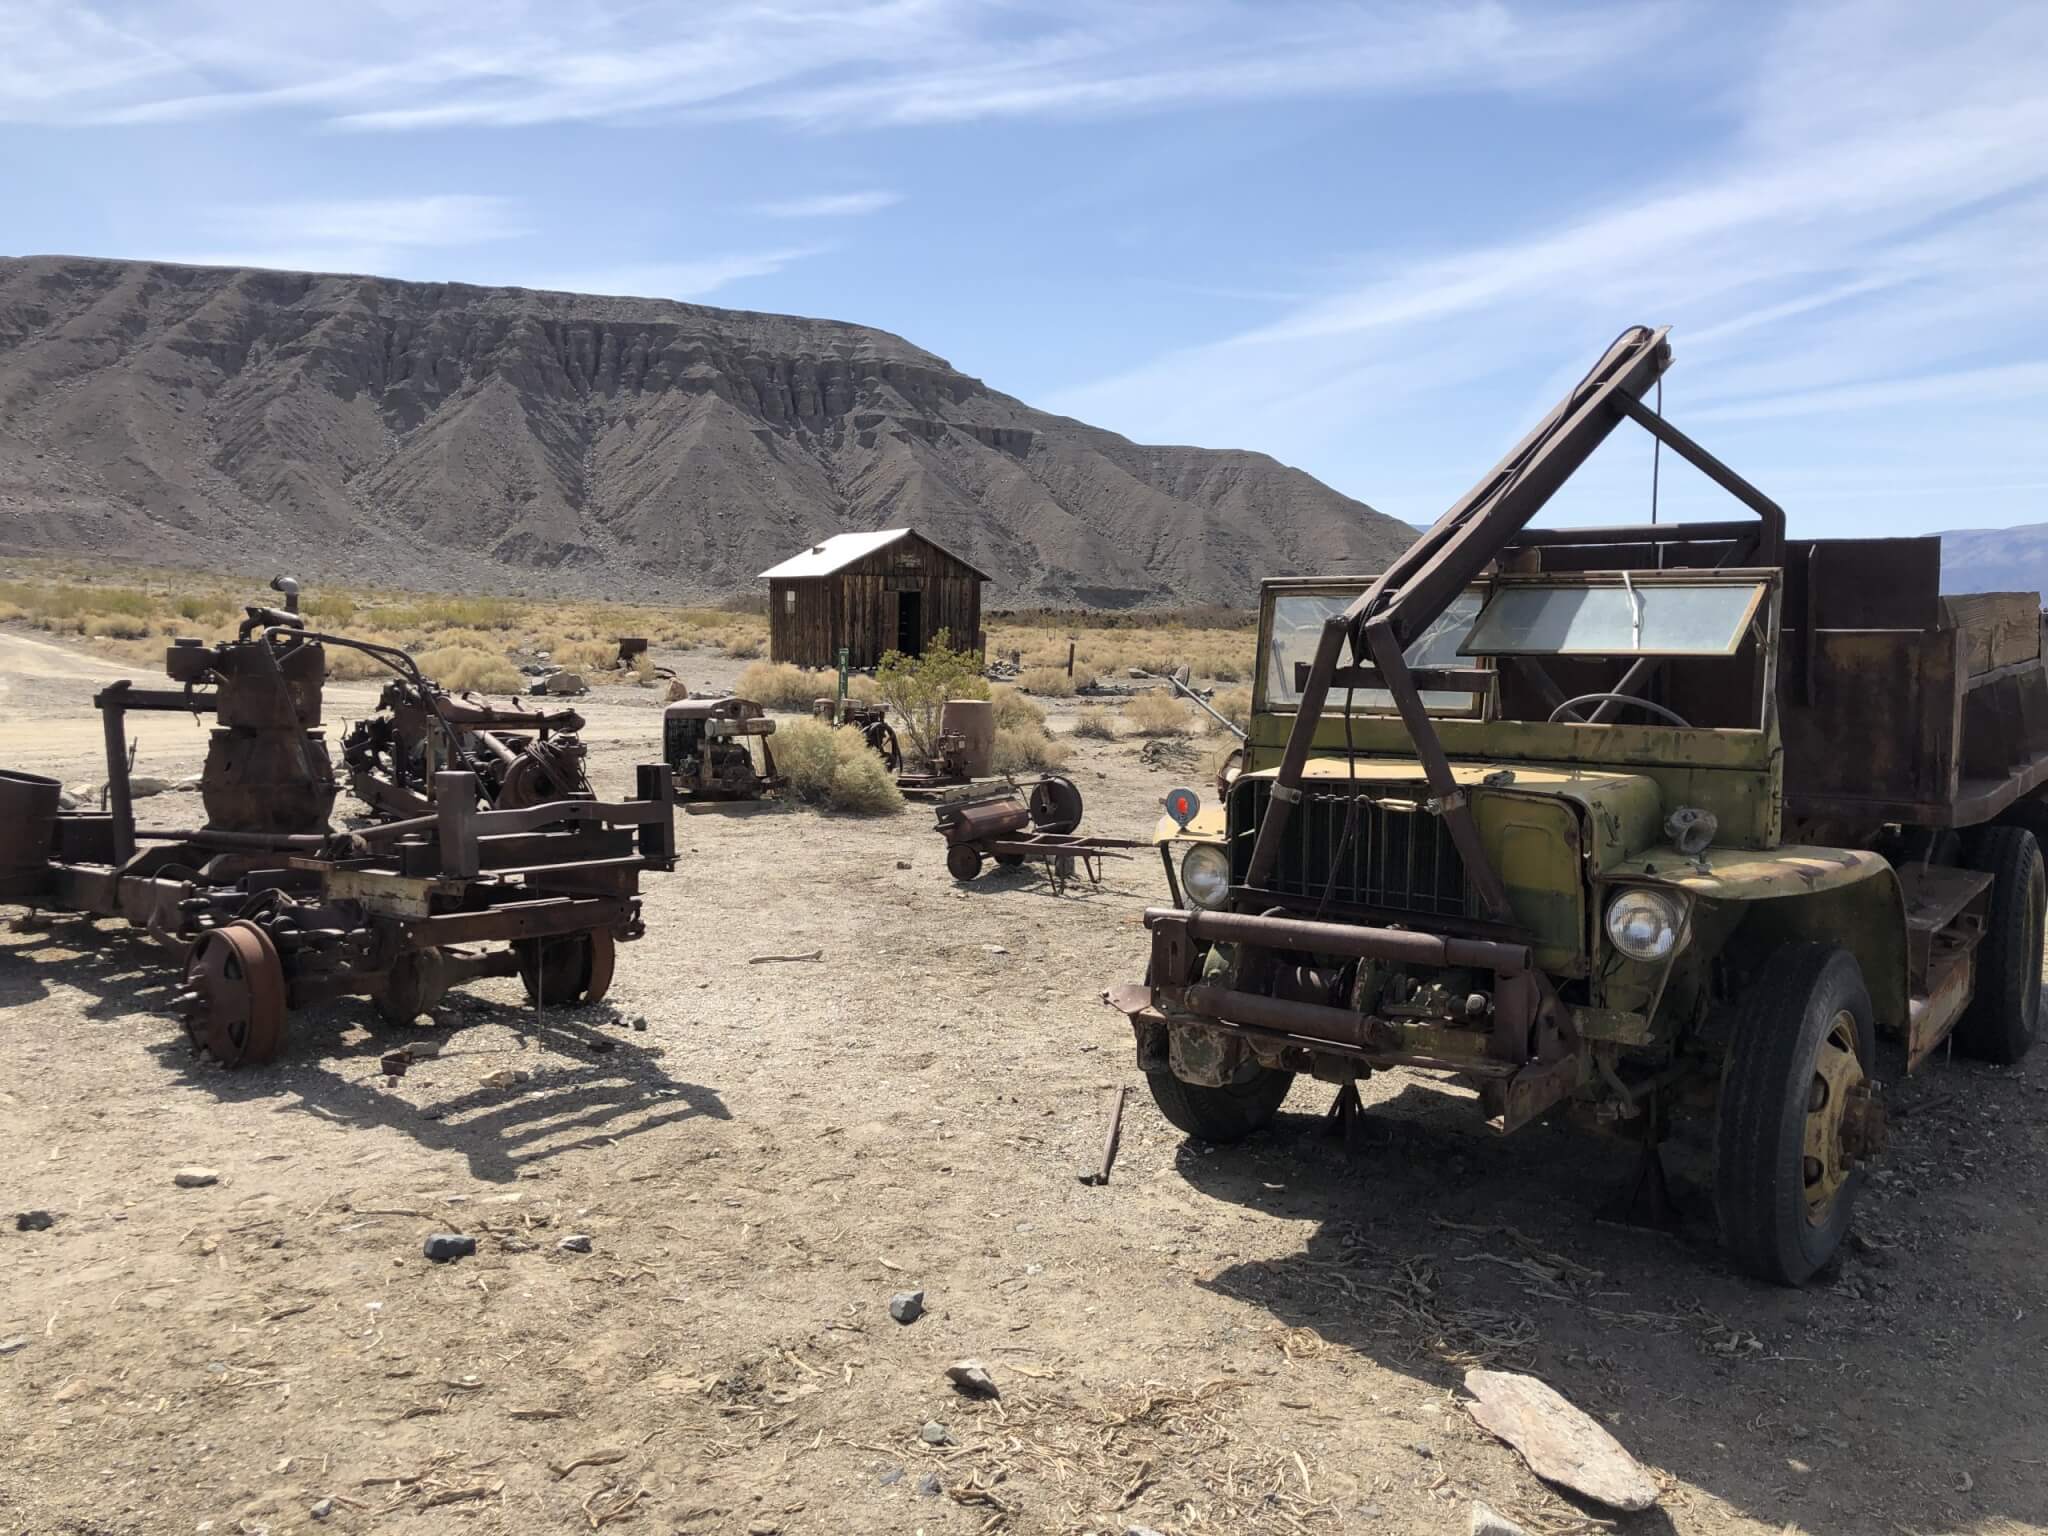 Panamint City: Camping in a Remote Ghost Town 2